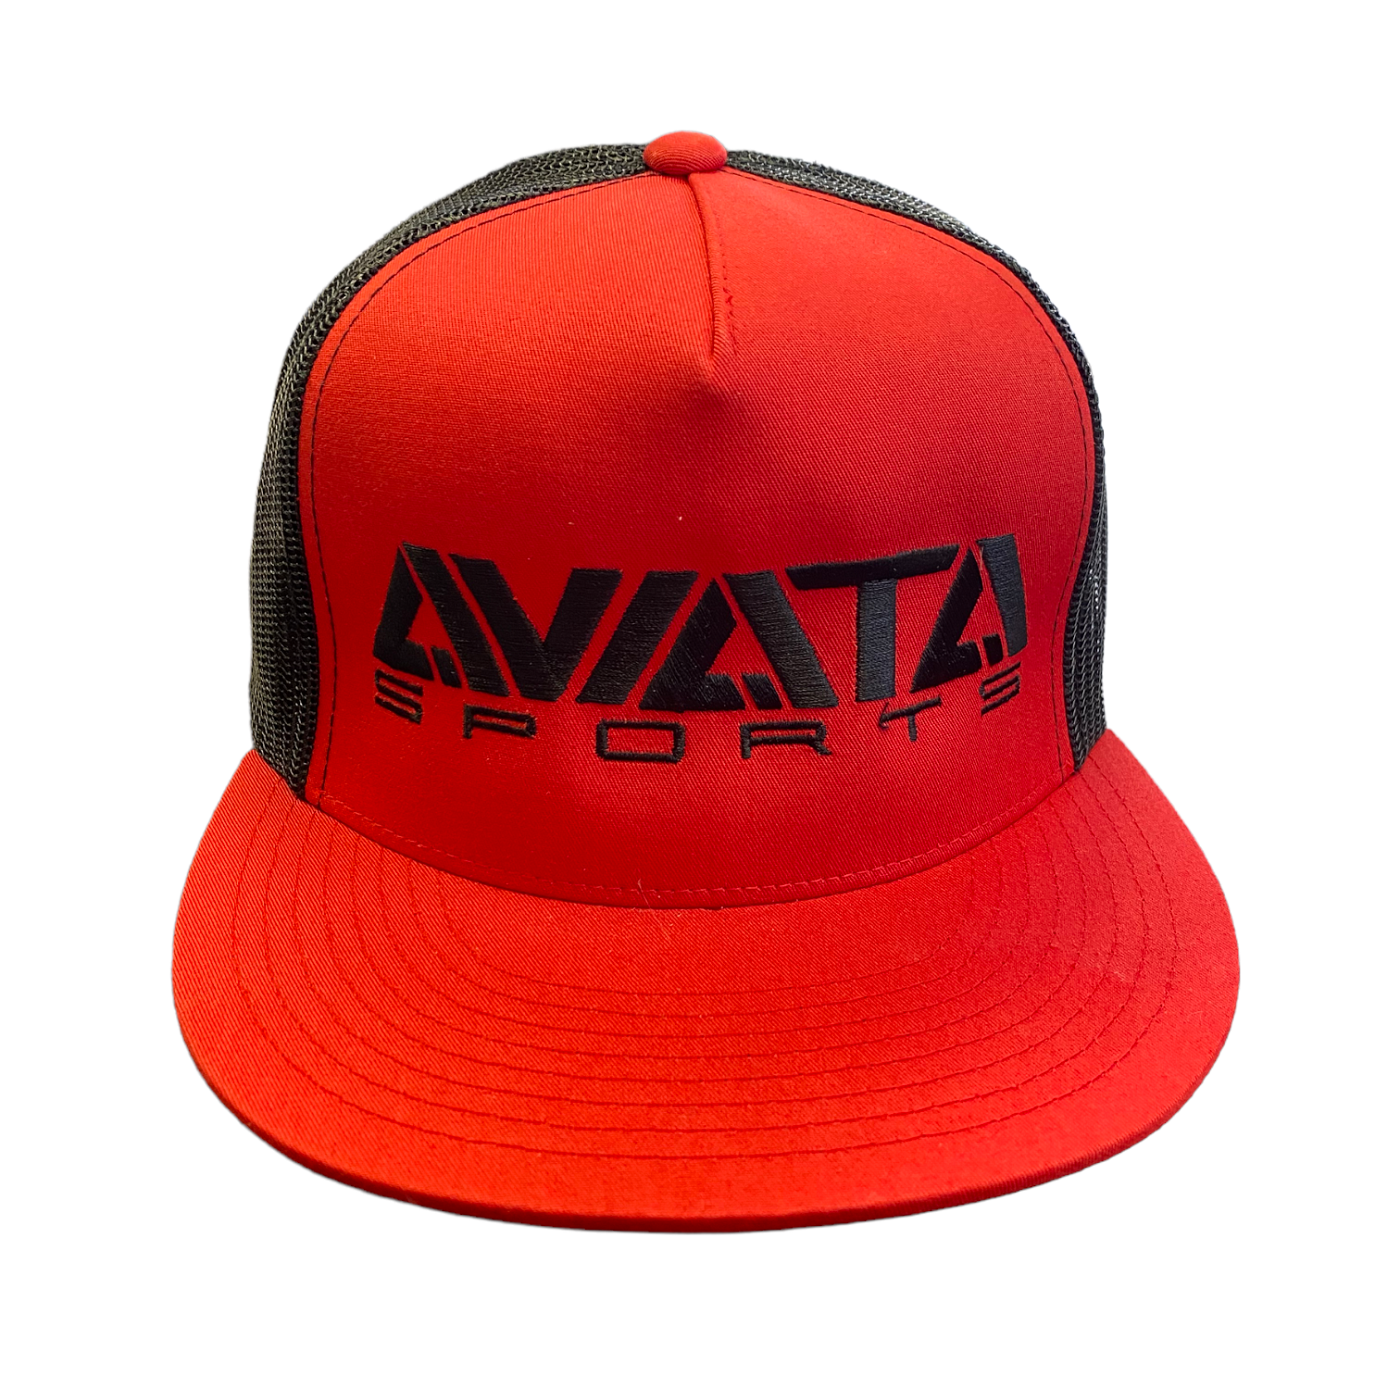 Ateam Classic Red Snapback Hat